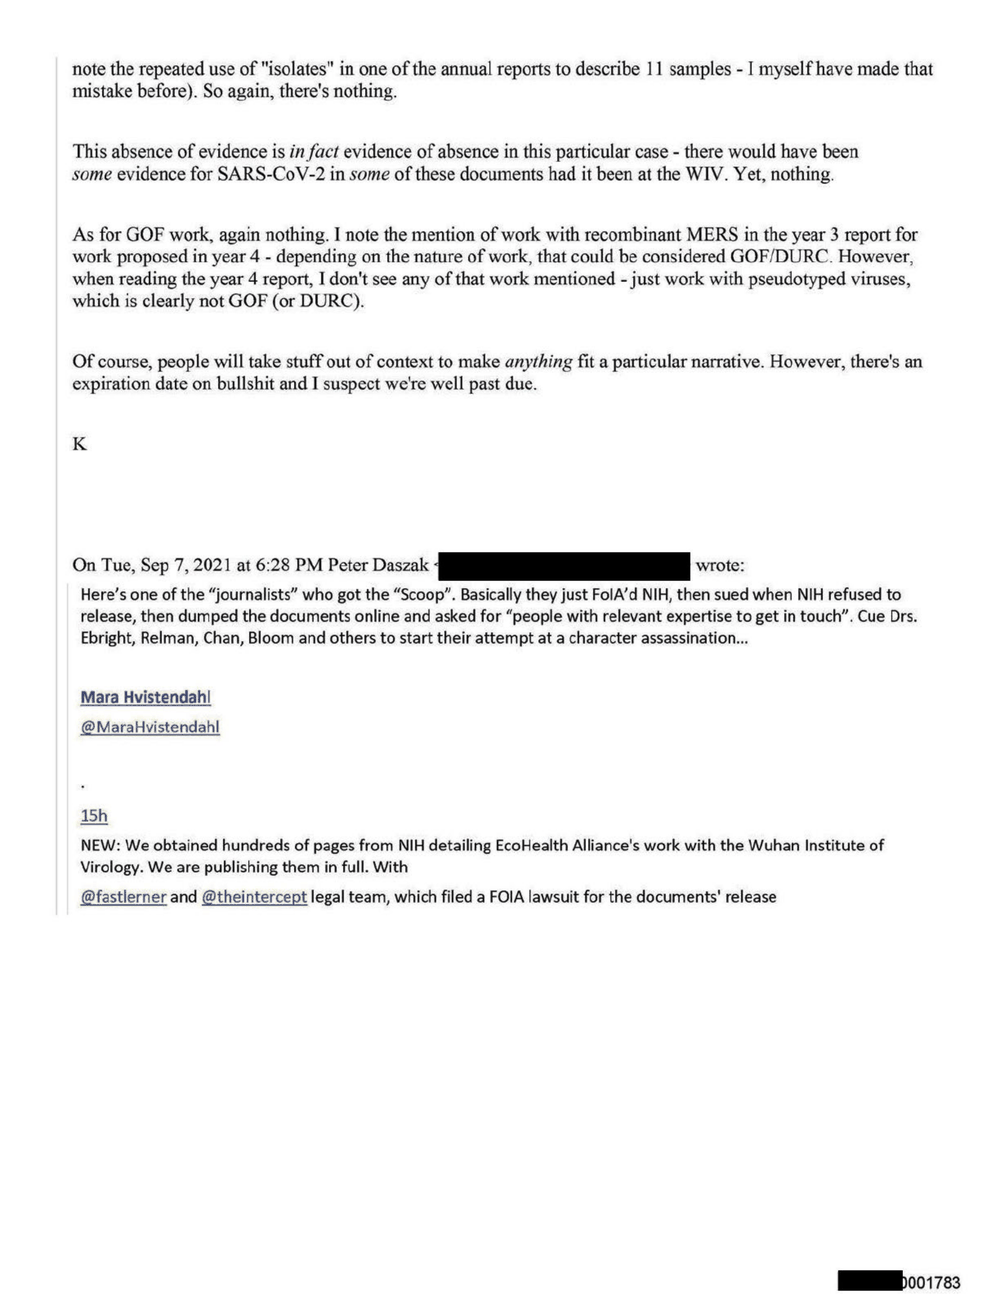 Page 10 from David Morens NIH Emails Redacted